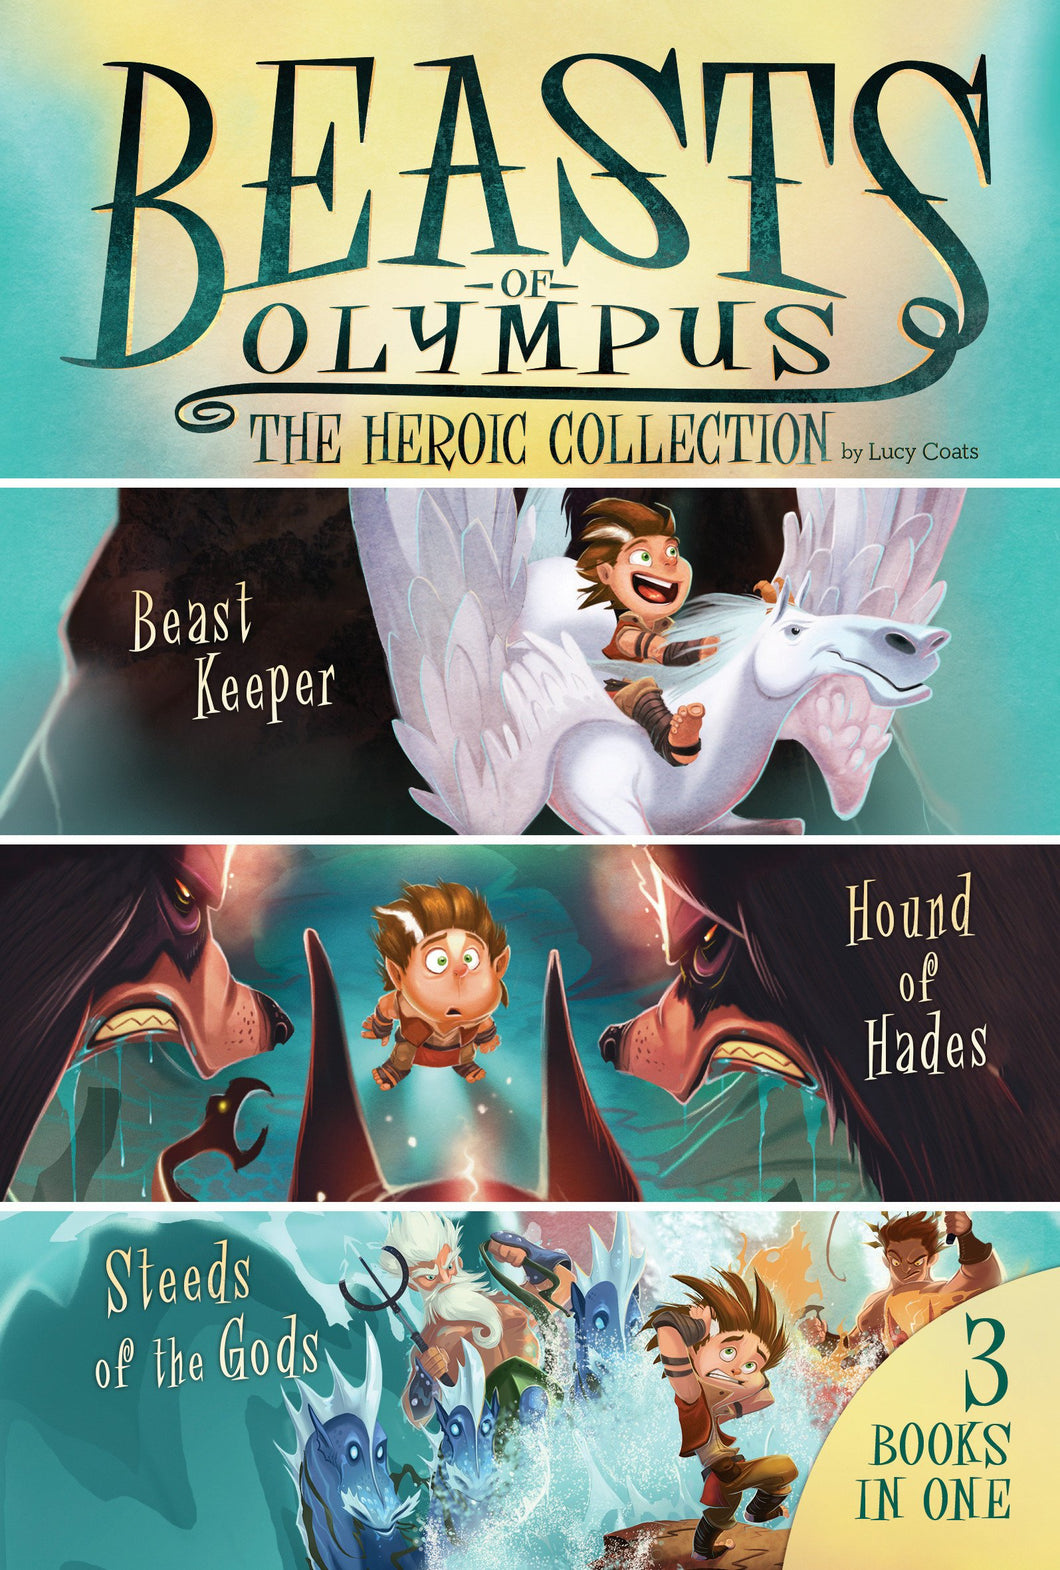 The Heroic Collection (Beasts of Olympus)